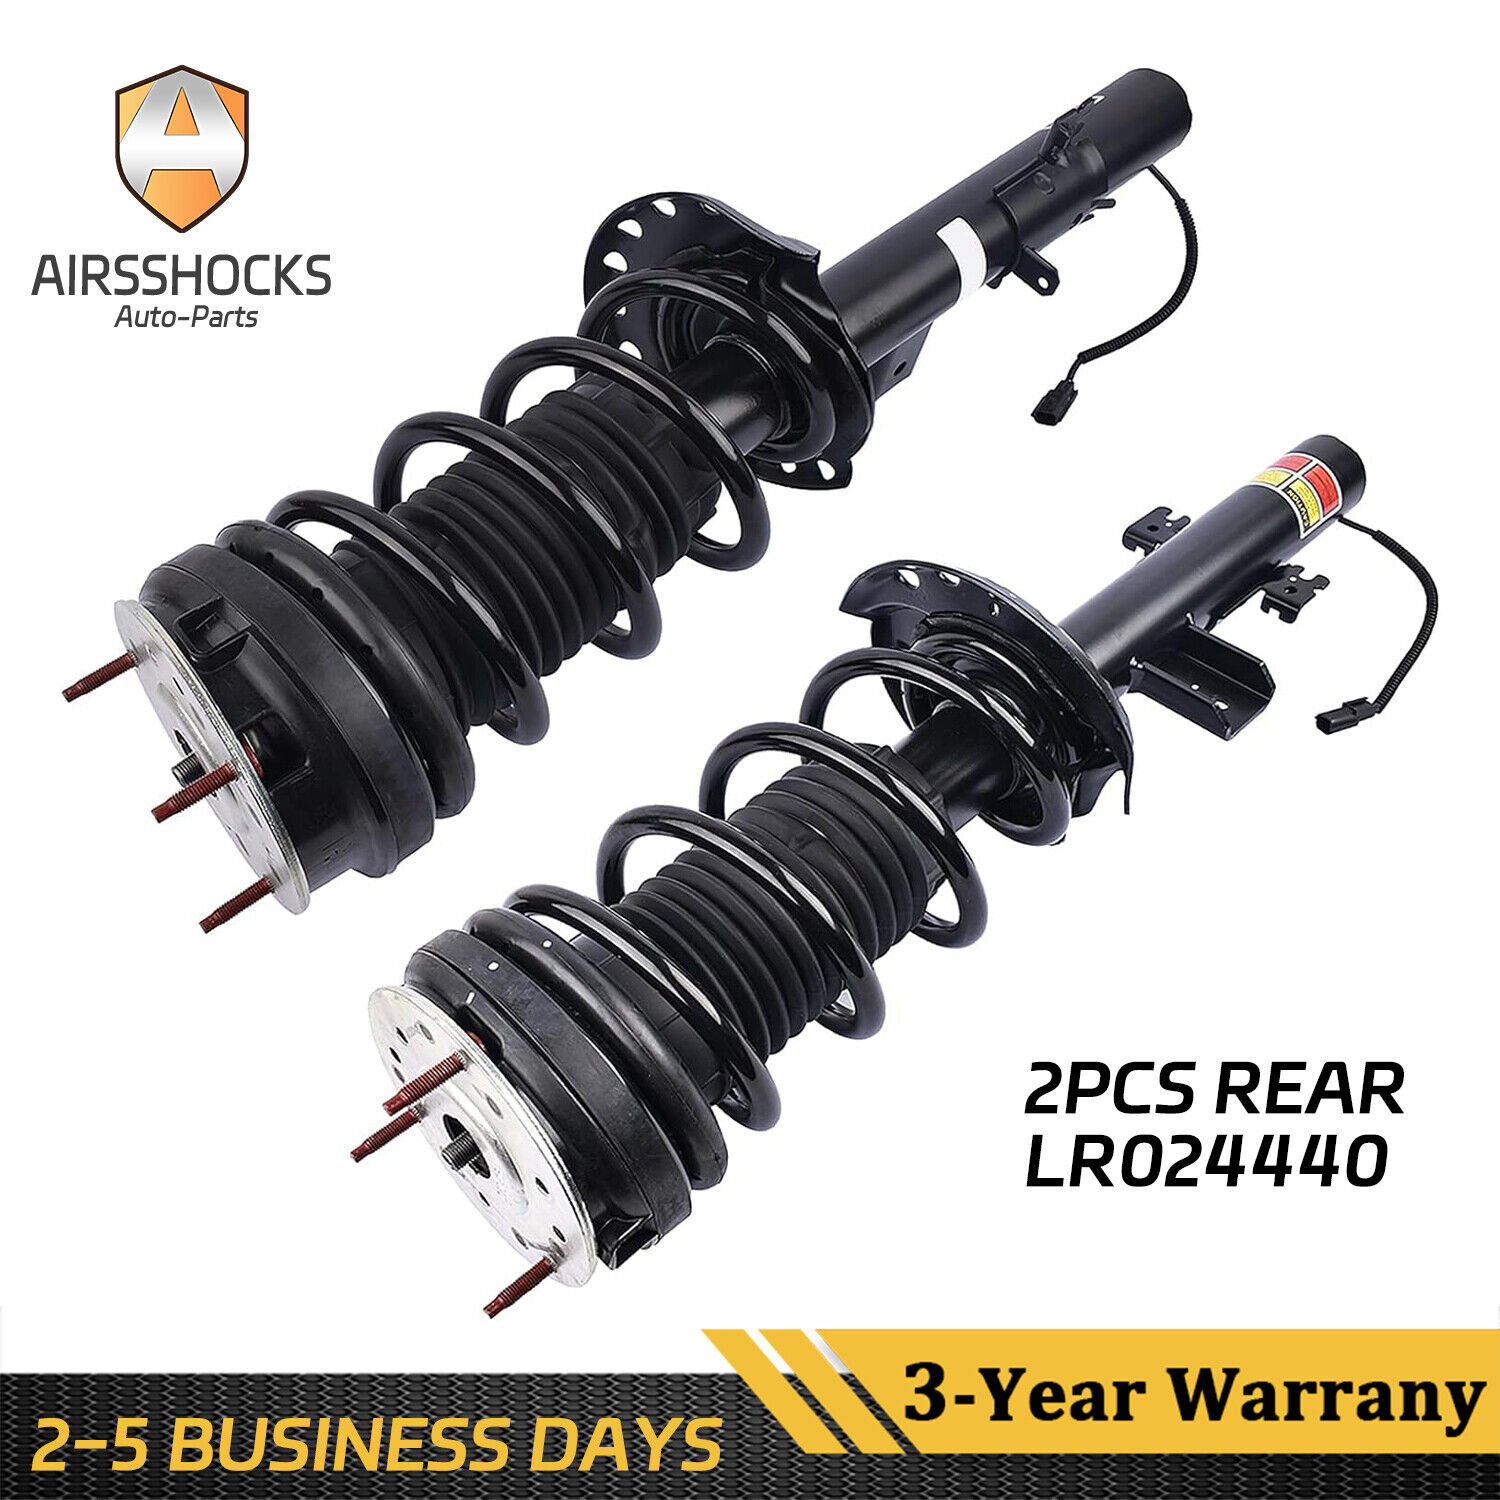 Pair New Rear L&R Shock Absorber Assys w/Magnetic For 12-18 Range Rover Evoque